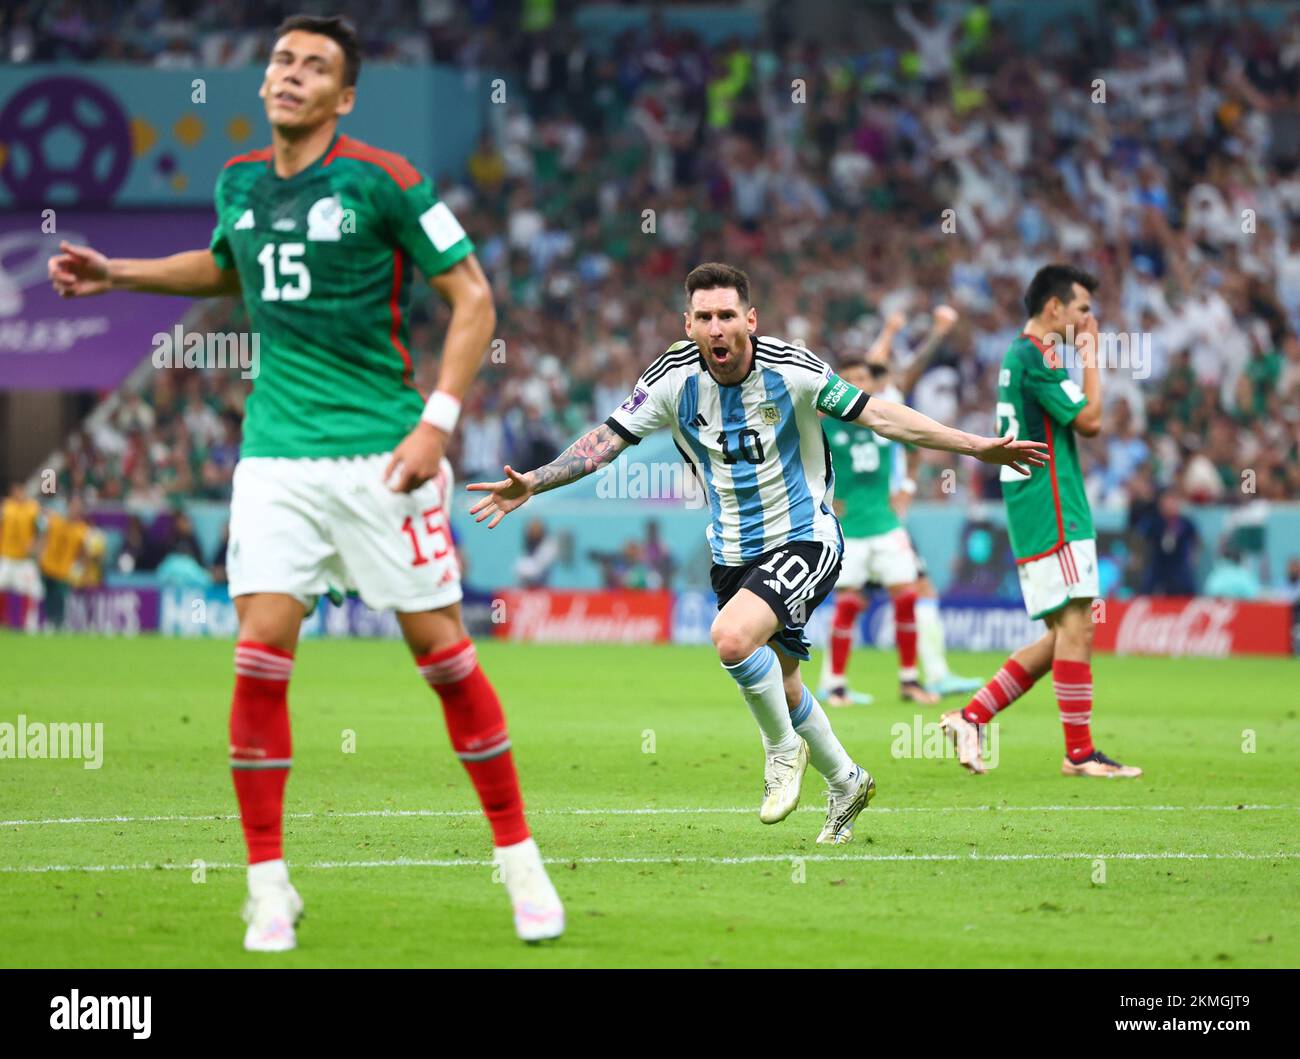 Lusail, Qatar. 26th Nov, 2022. Soccer, World Cup, Argentina - Mexico, Preliminary Round, Group C, Matchday 2, Lusail Iconic Stadium, Lionel Messi (M) of Argentina cheers after scoring to make it 1-0. Hector Moreno of Mexico is on the left. Hirving Lozano of Mexico walks in the background on the right. Credit: Tom Weller/dpa/Alamy Live News Stock Photo